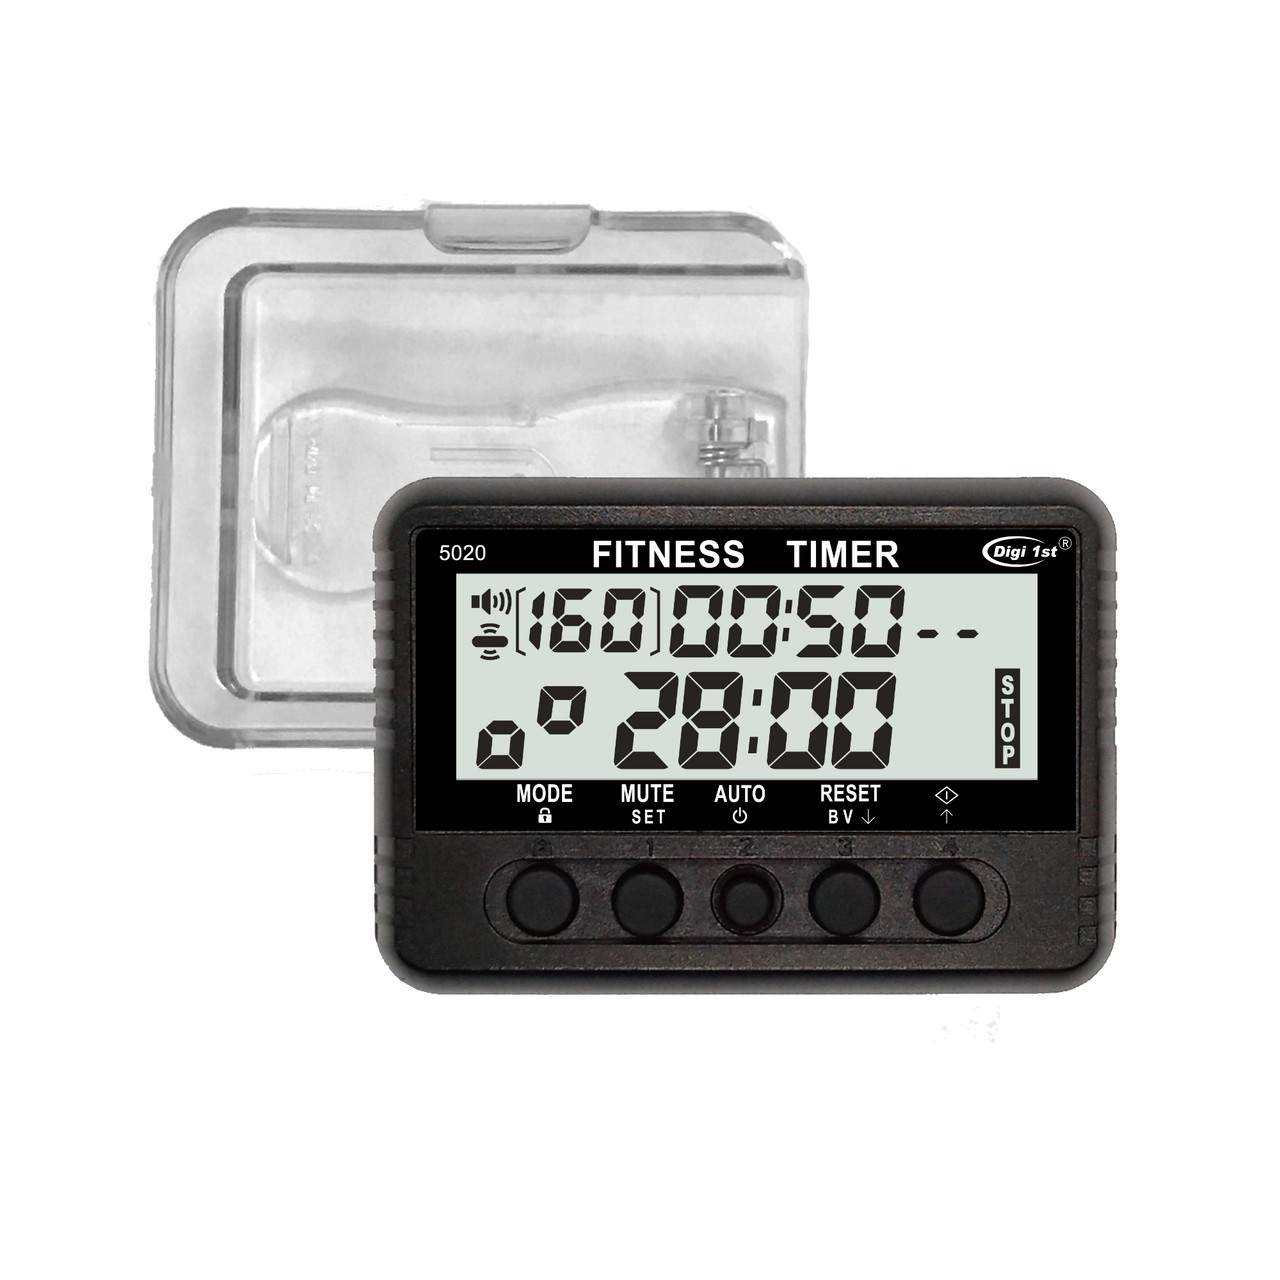 Digi 1st T-810 9999 Hour/Minute Handheld Count Up and Countdown Timer